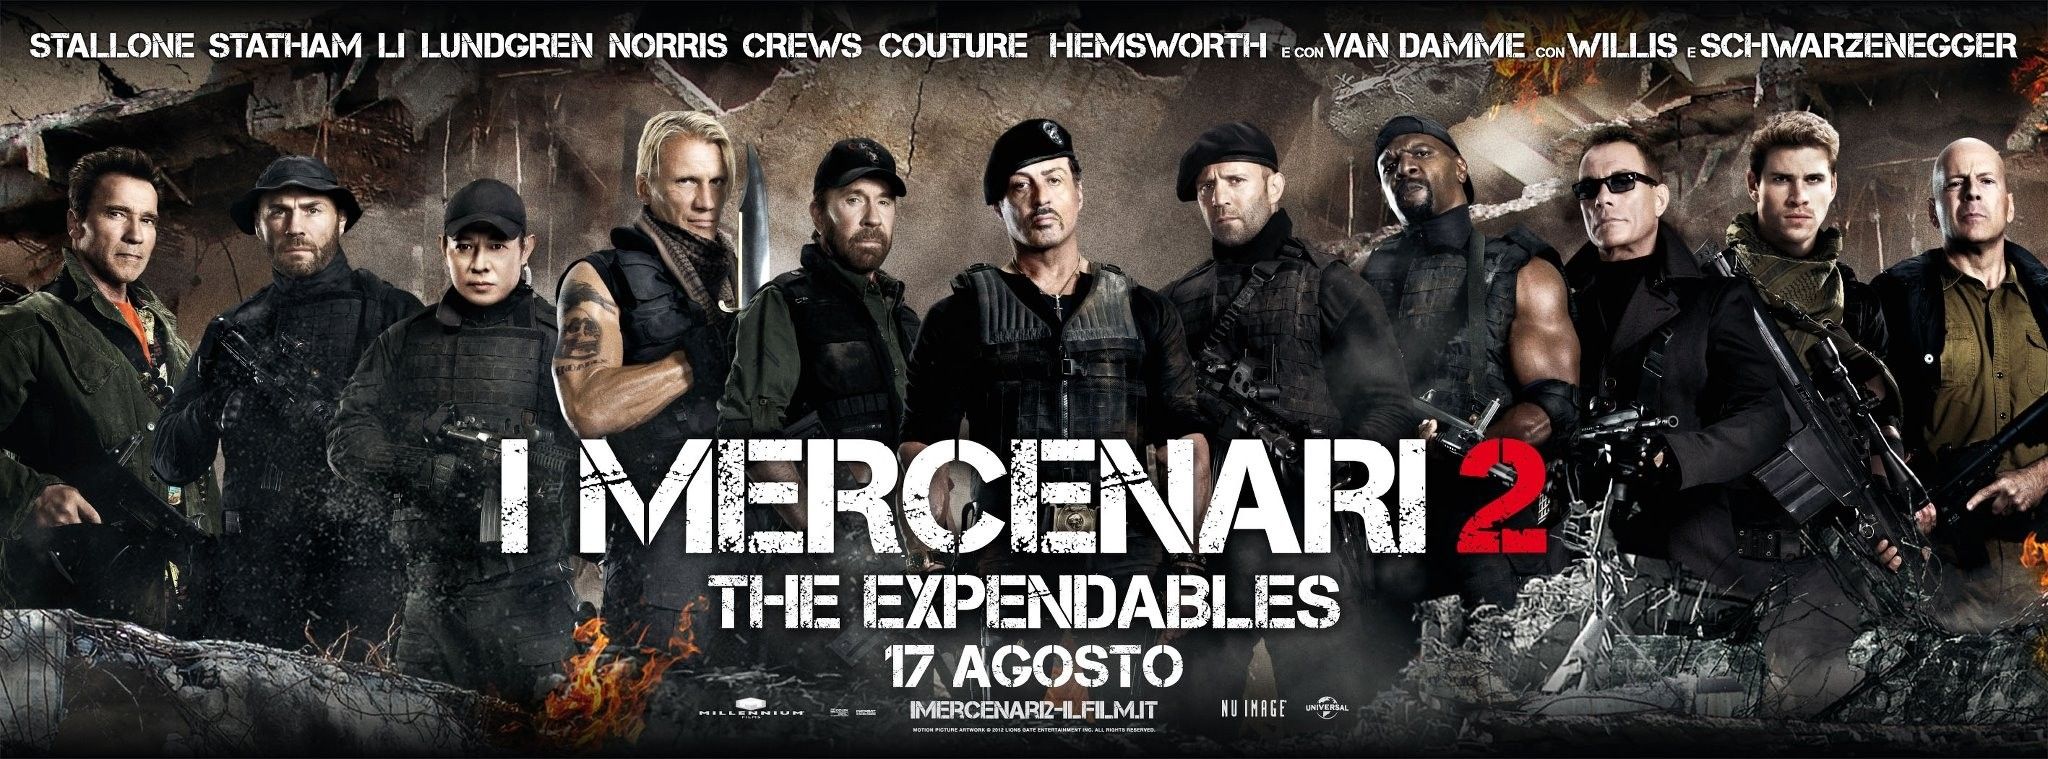 The Expendables 2 International Banner